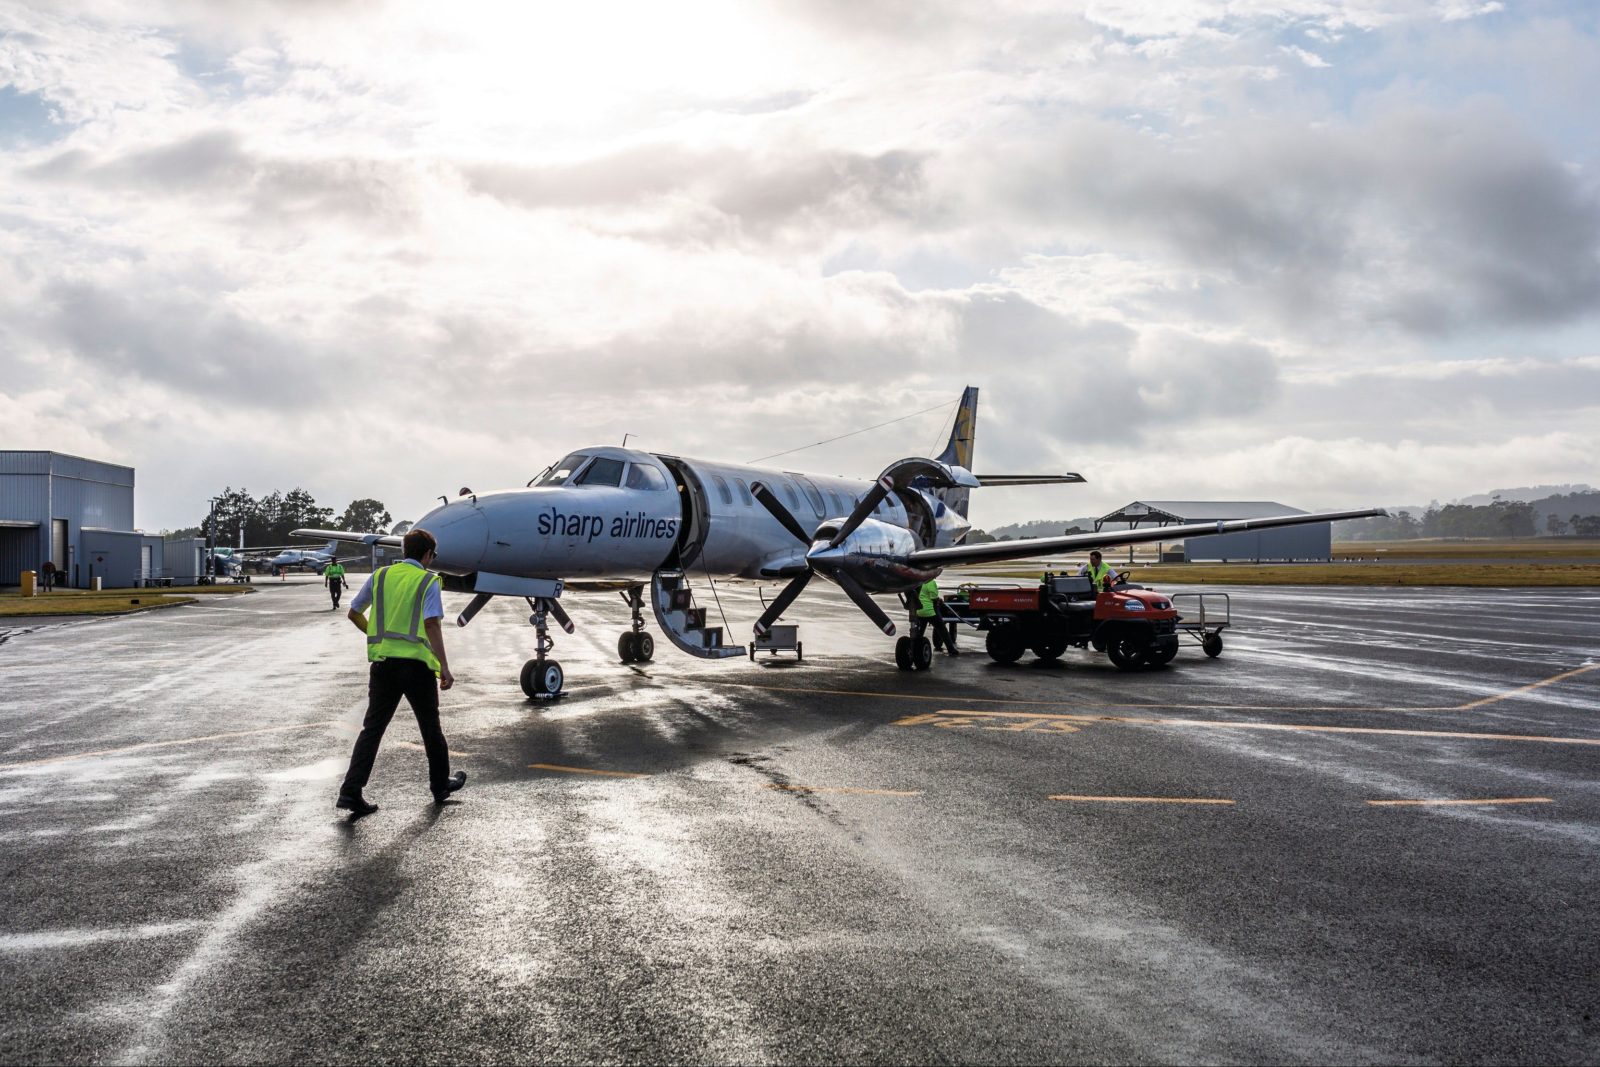 Sharp Airlines at King Island Airport